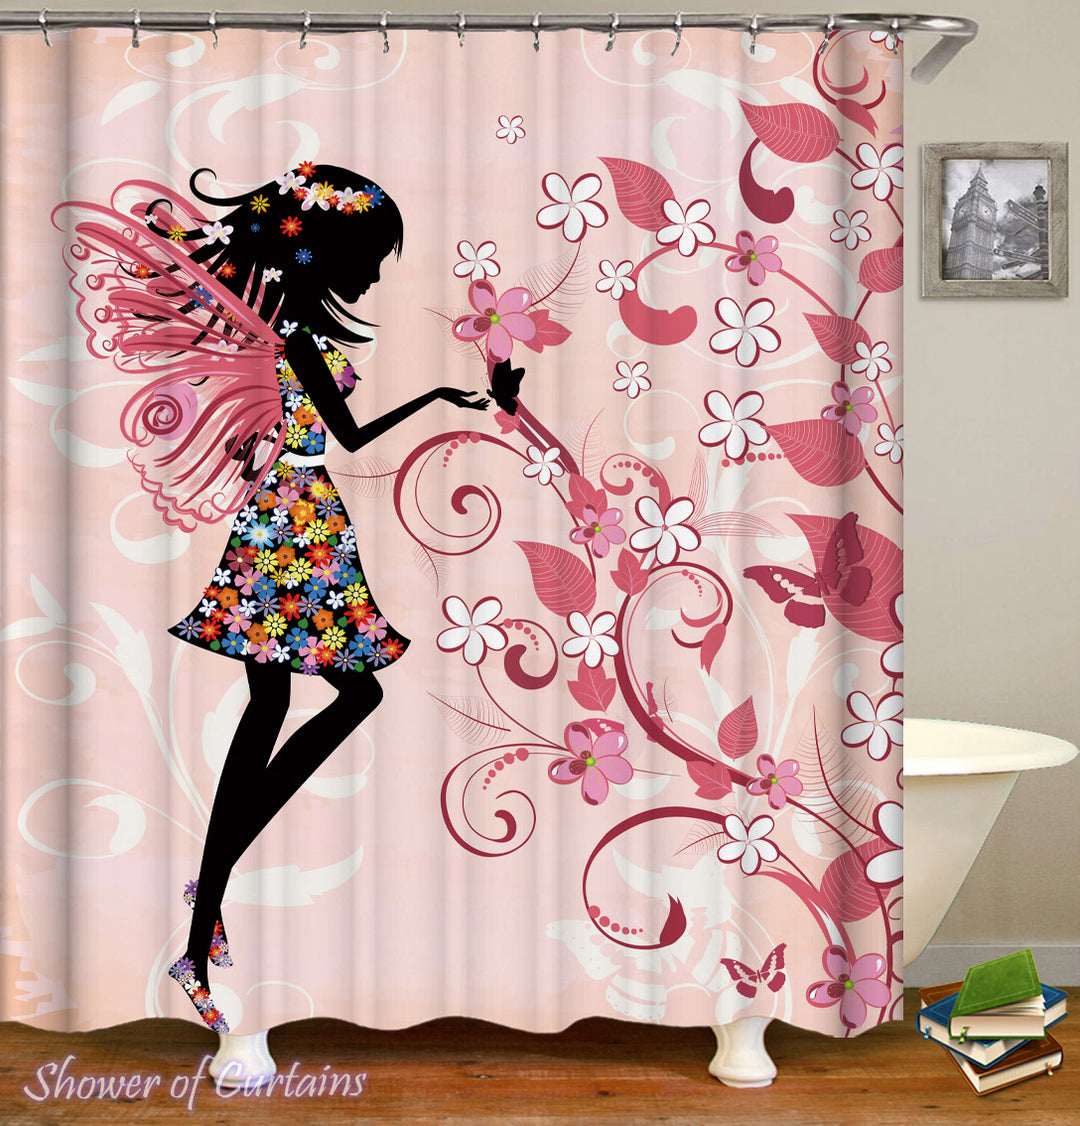 Pink Shower Curtain - Girly Black Figure Over Pink Bathroom